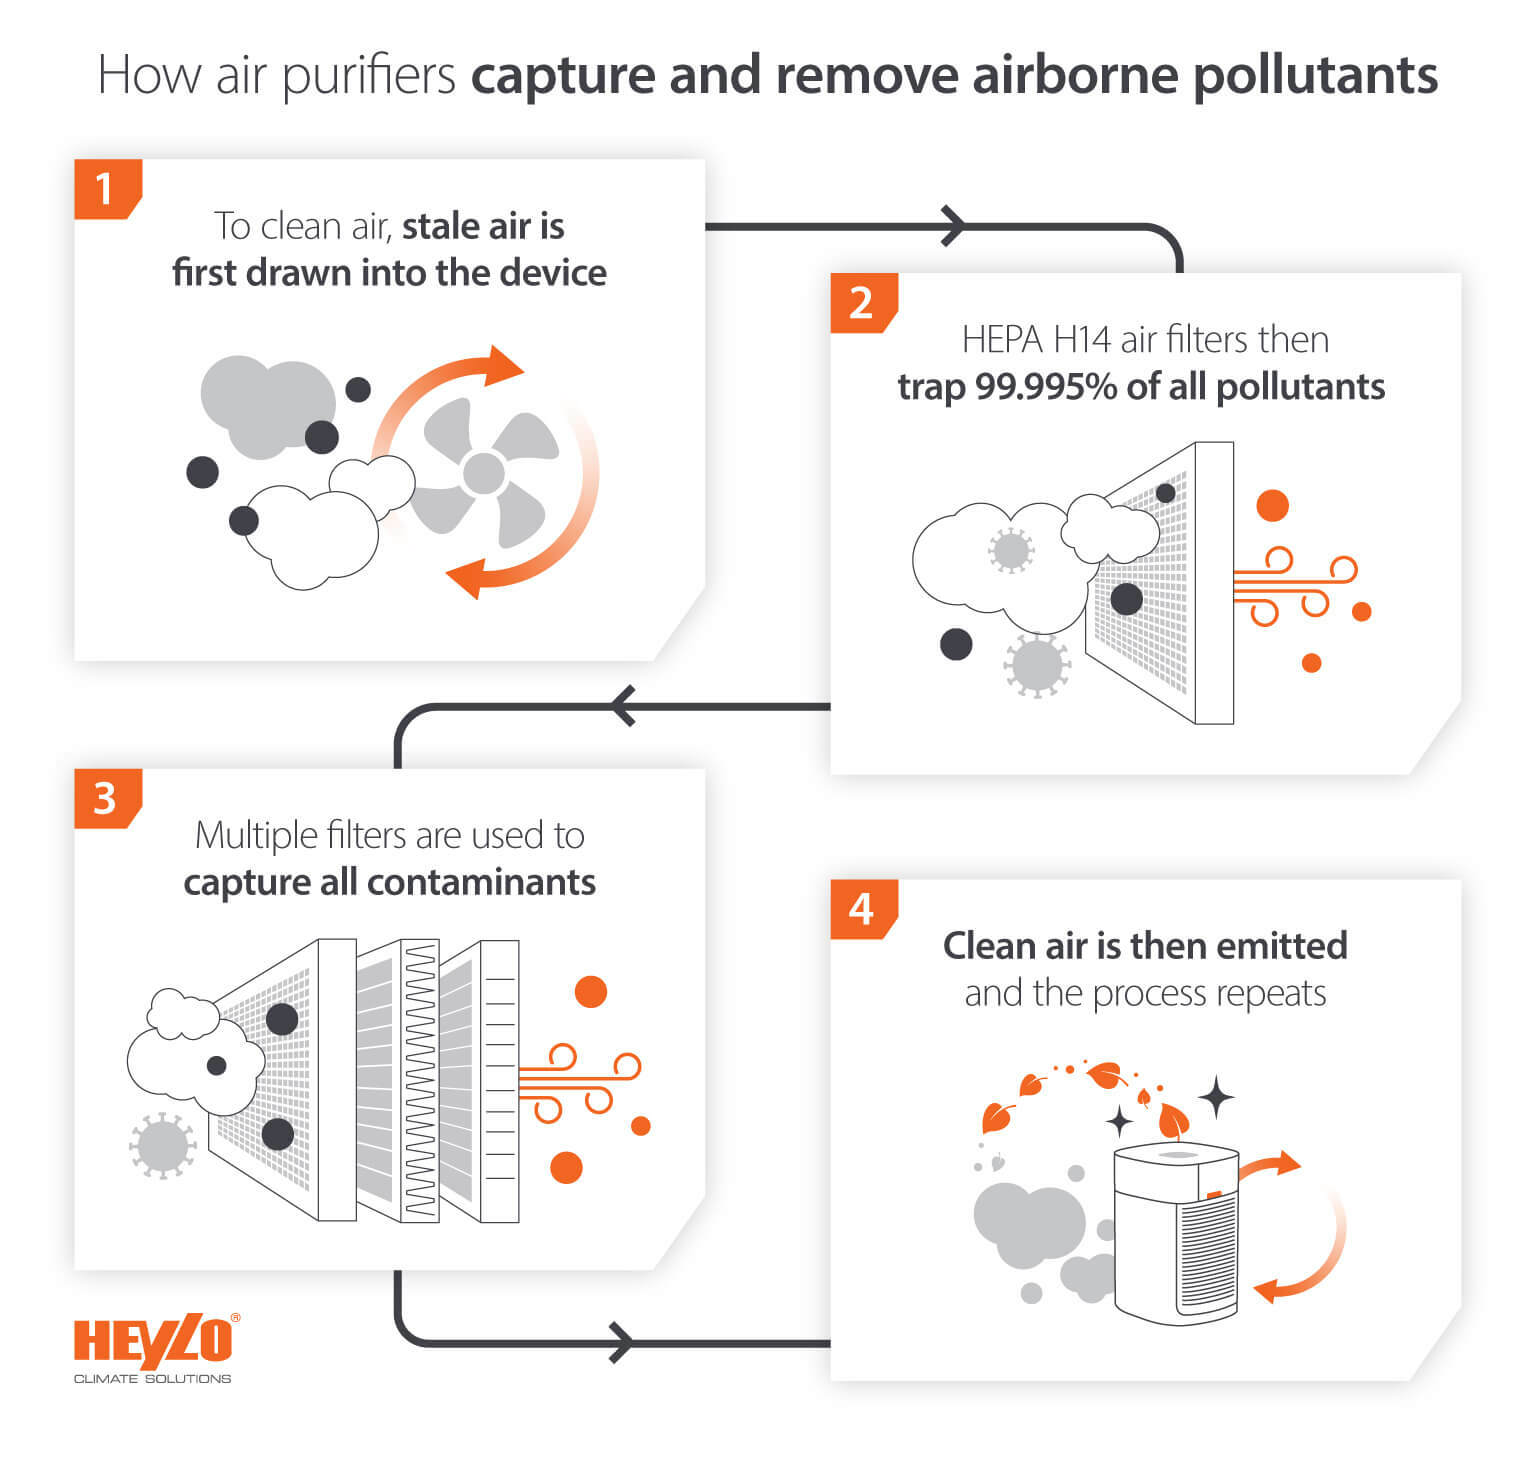 How air purifiers capture, reduce and remove airborne pollutants - Infographic image